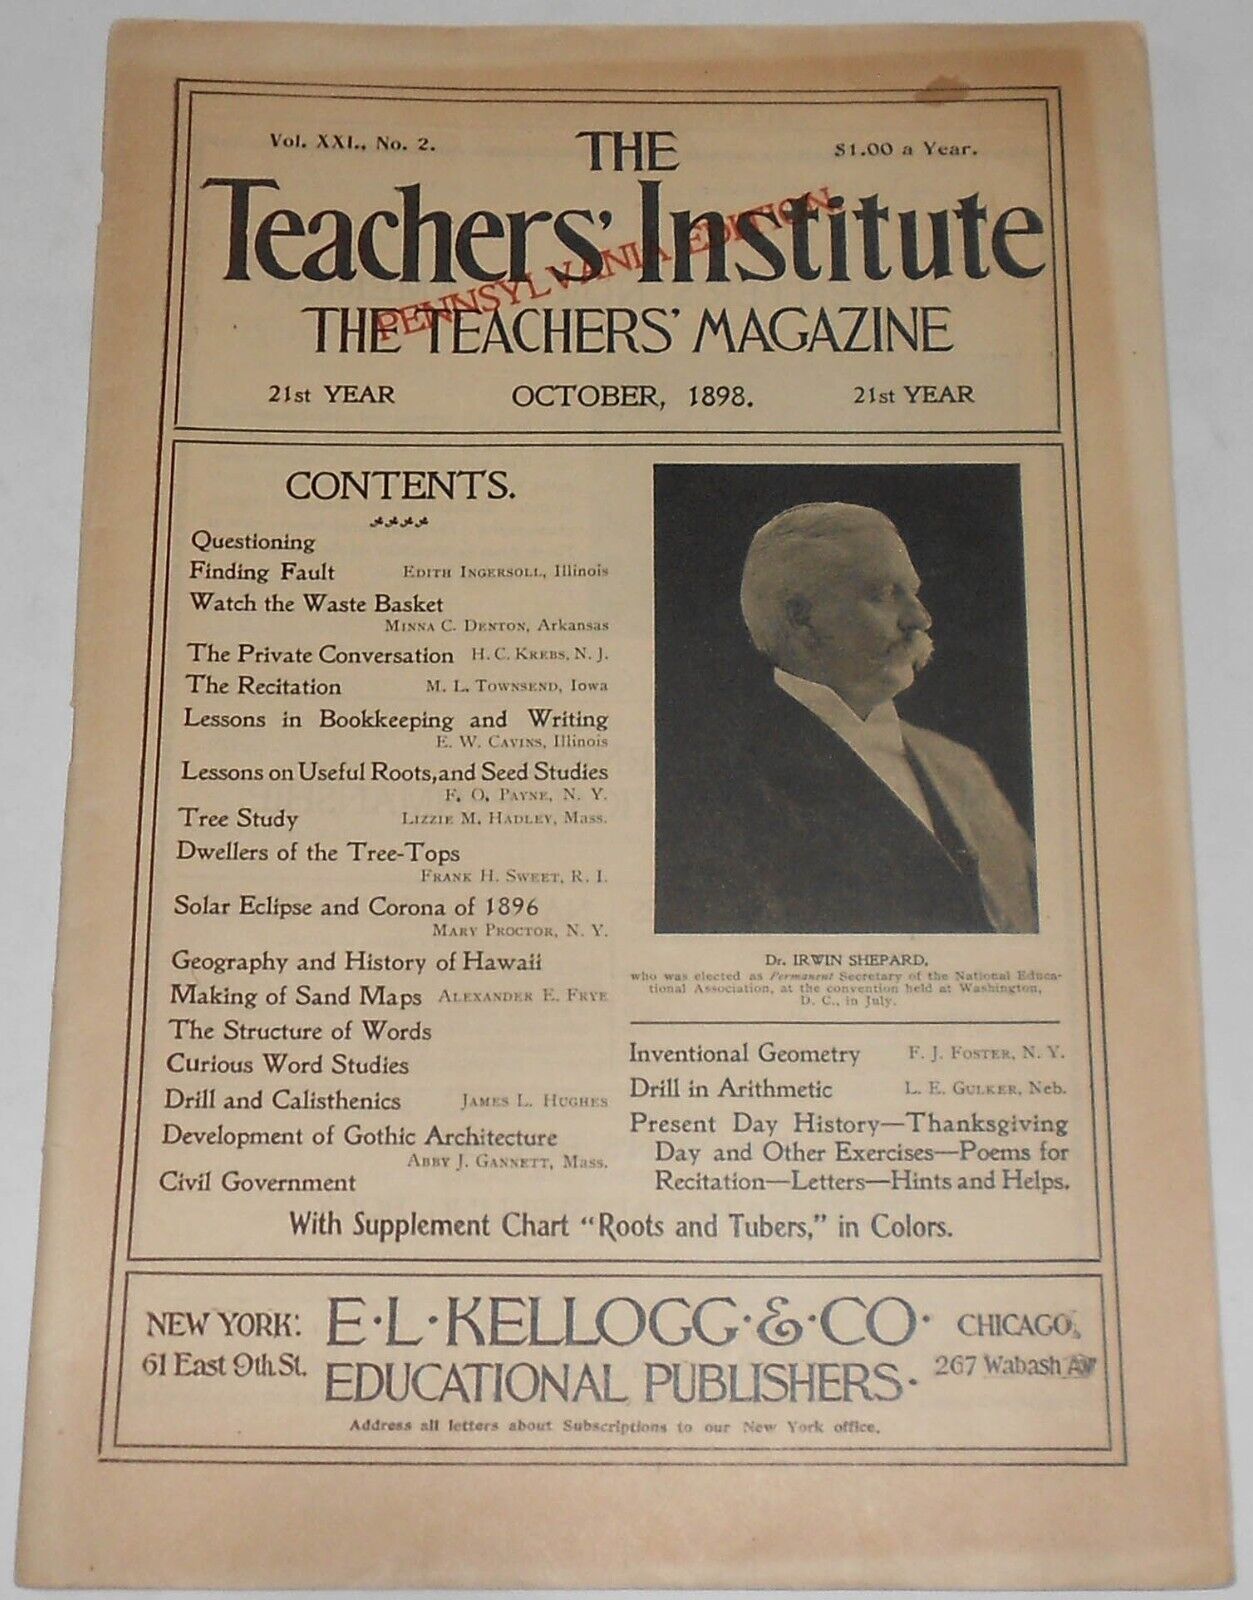 THE TEACHERS INSTITUTE October 1898 ANTIQUE Teachers Magazine PA EDITION 46pages